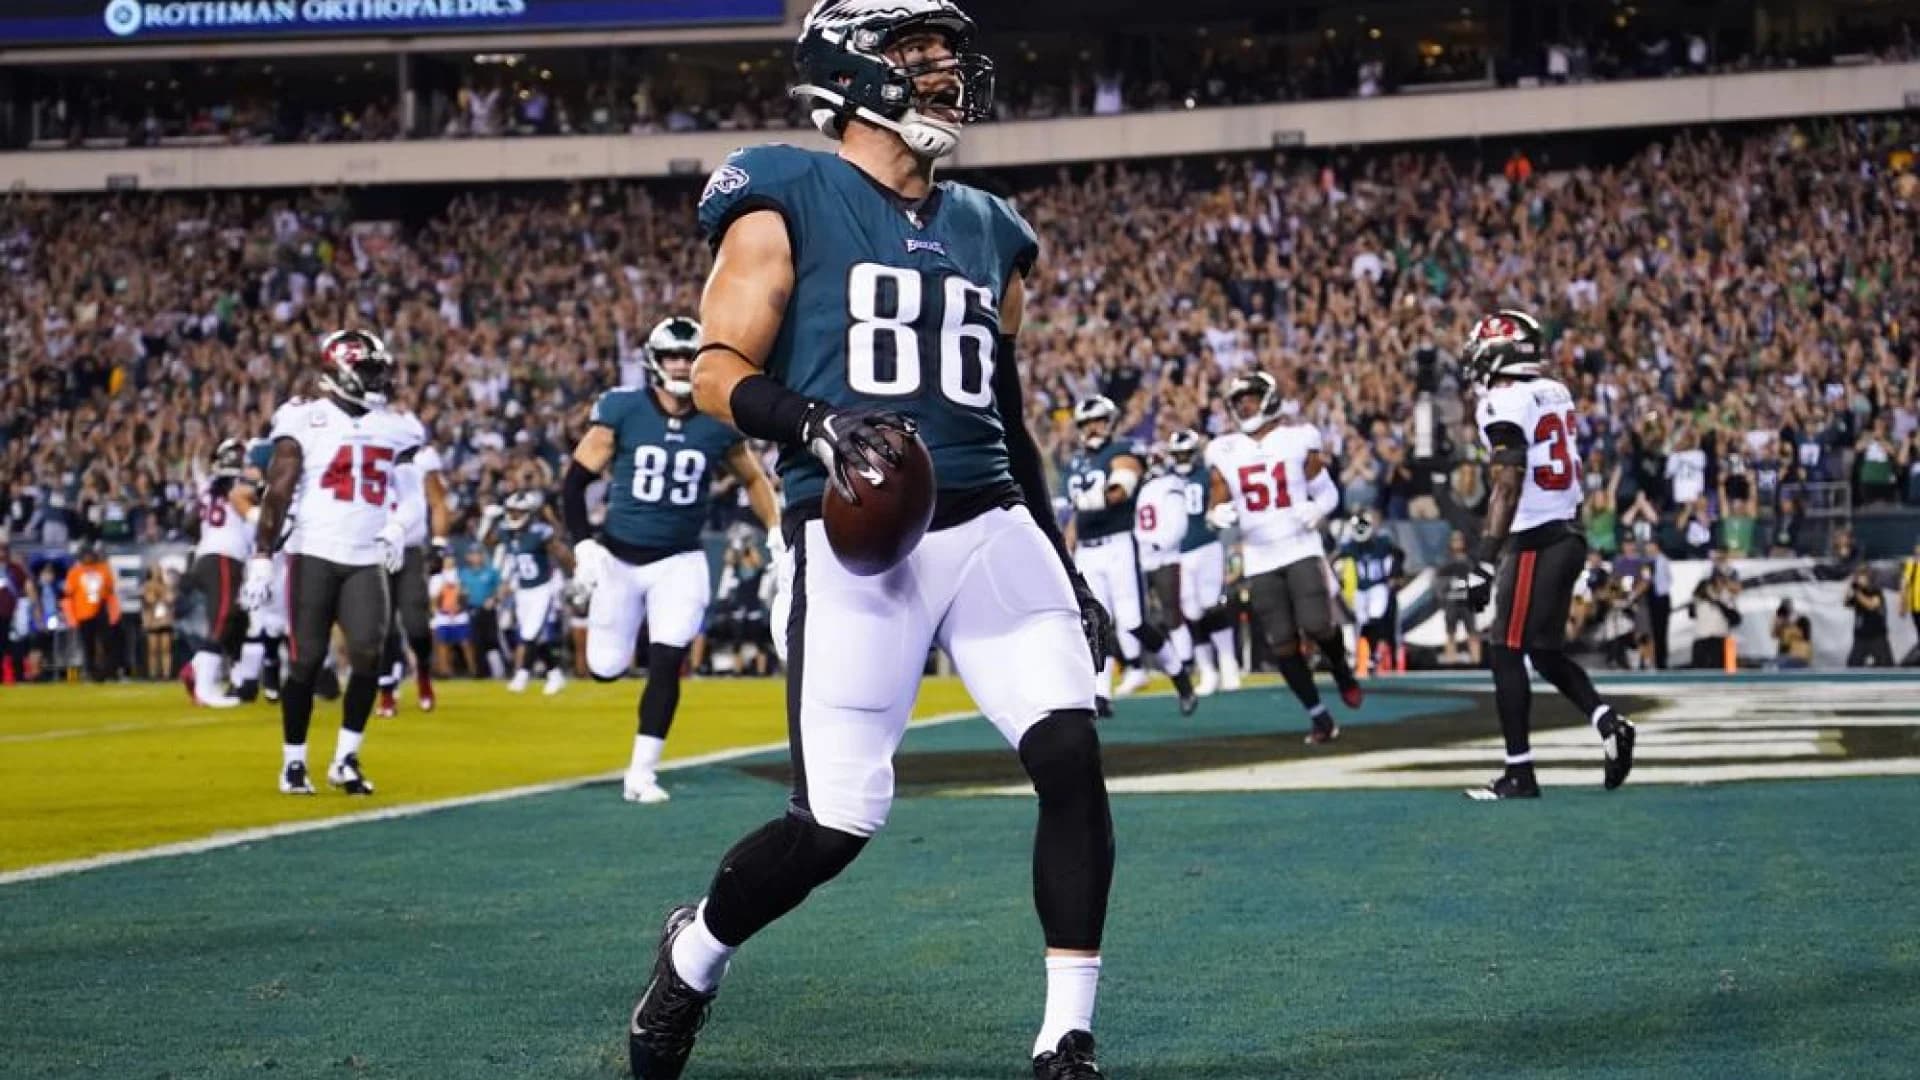 Cardinals acquire TE Ertz in trade with Eagles